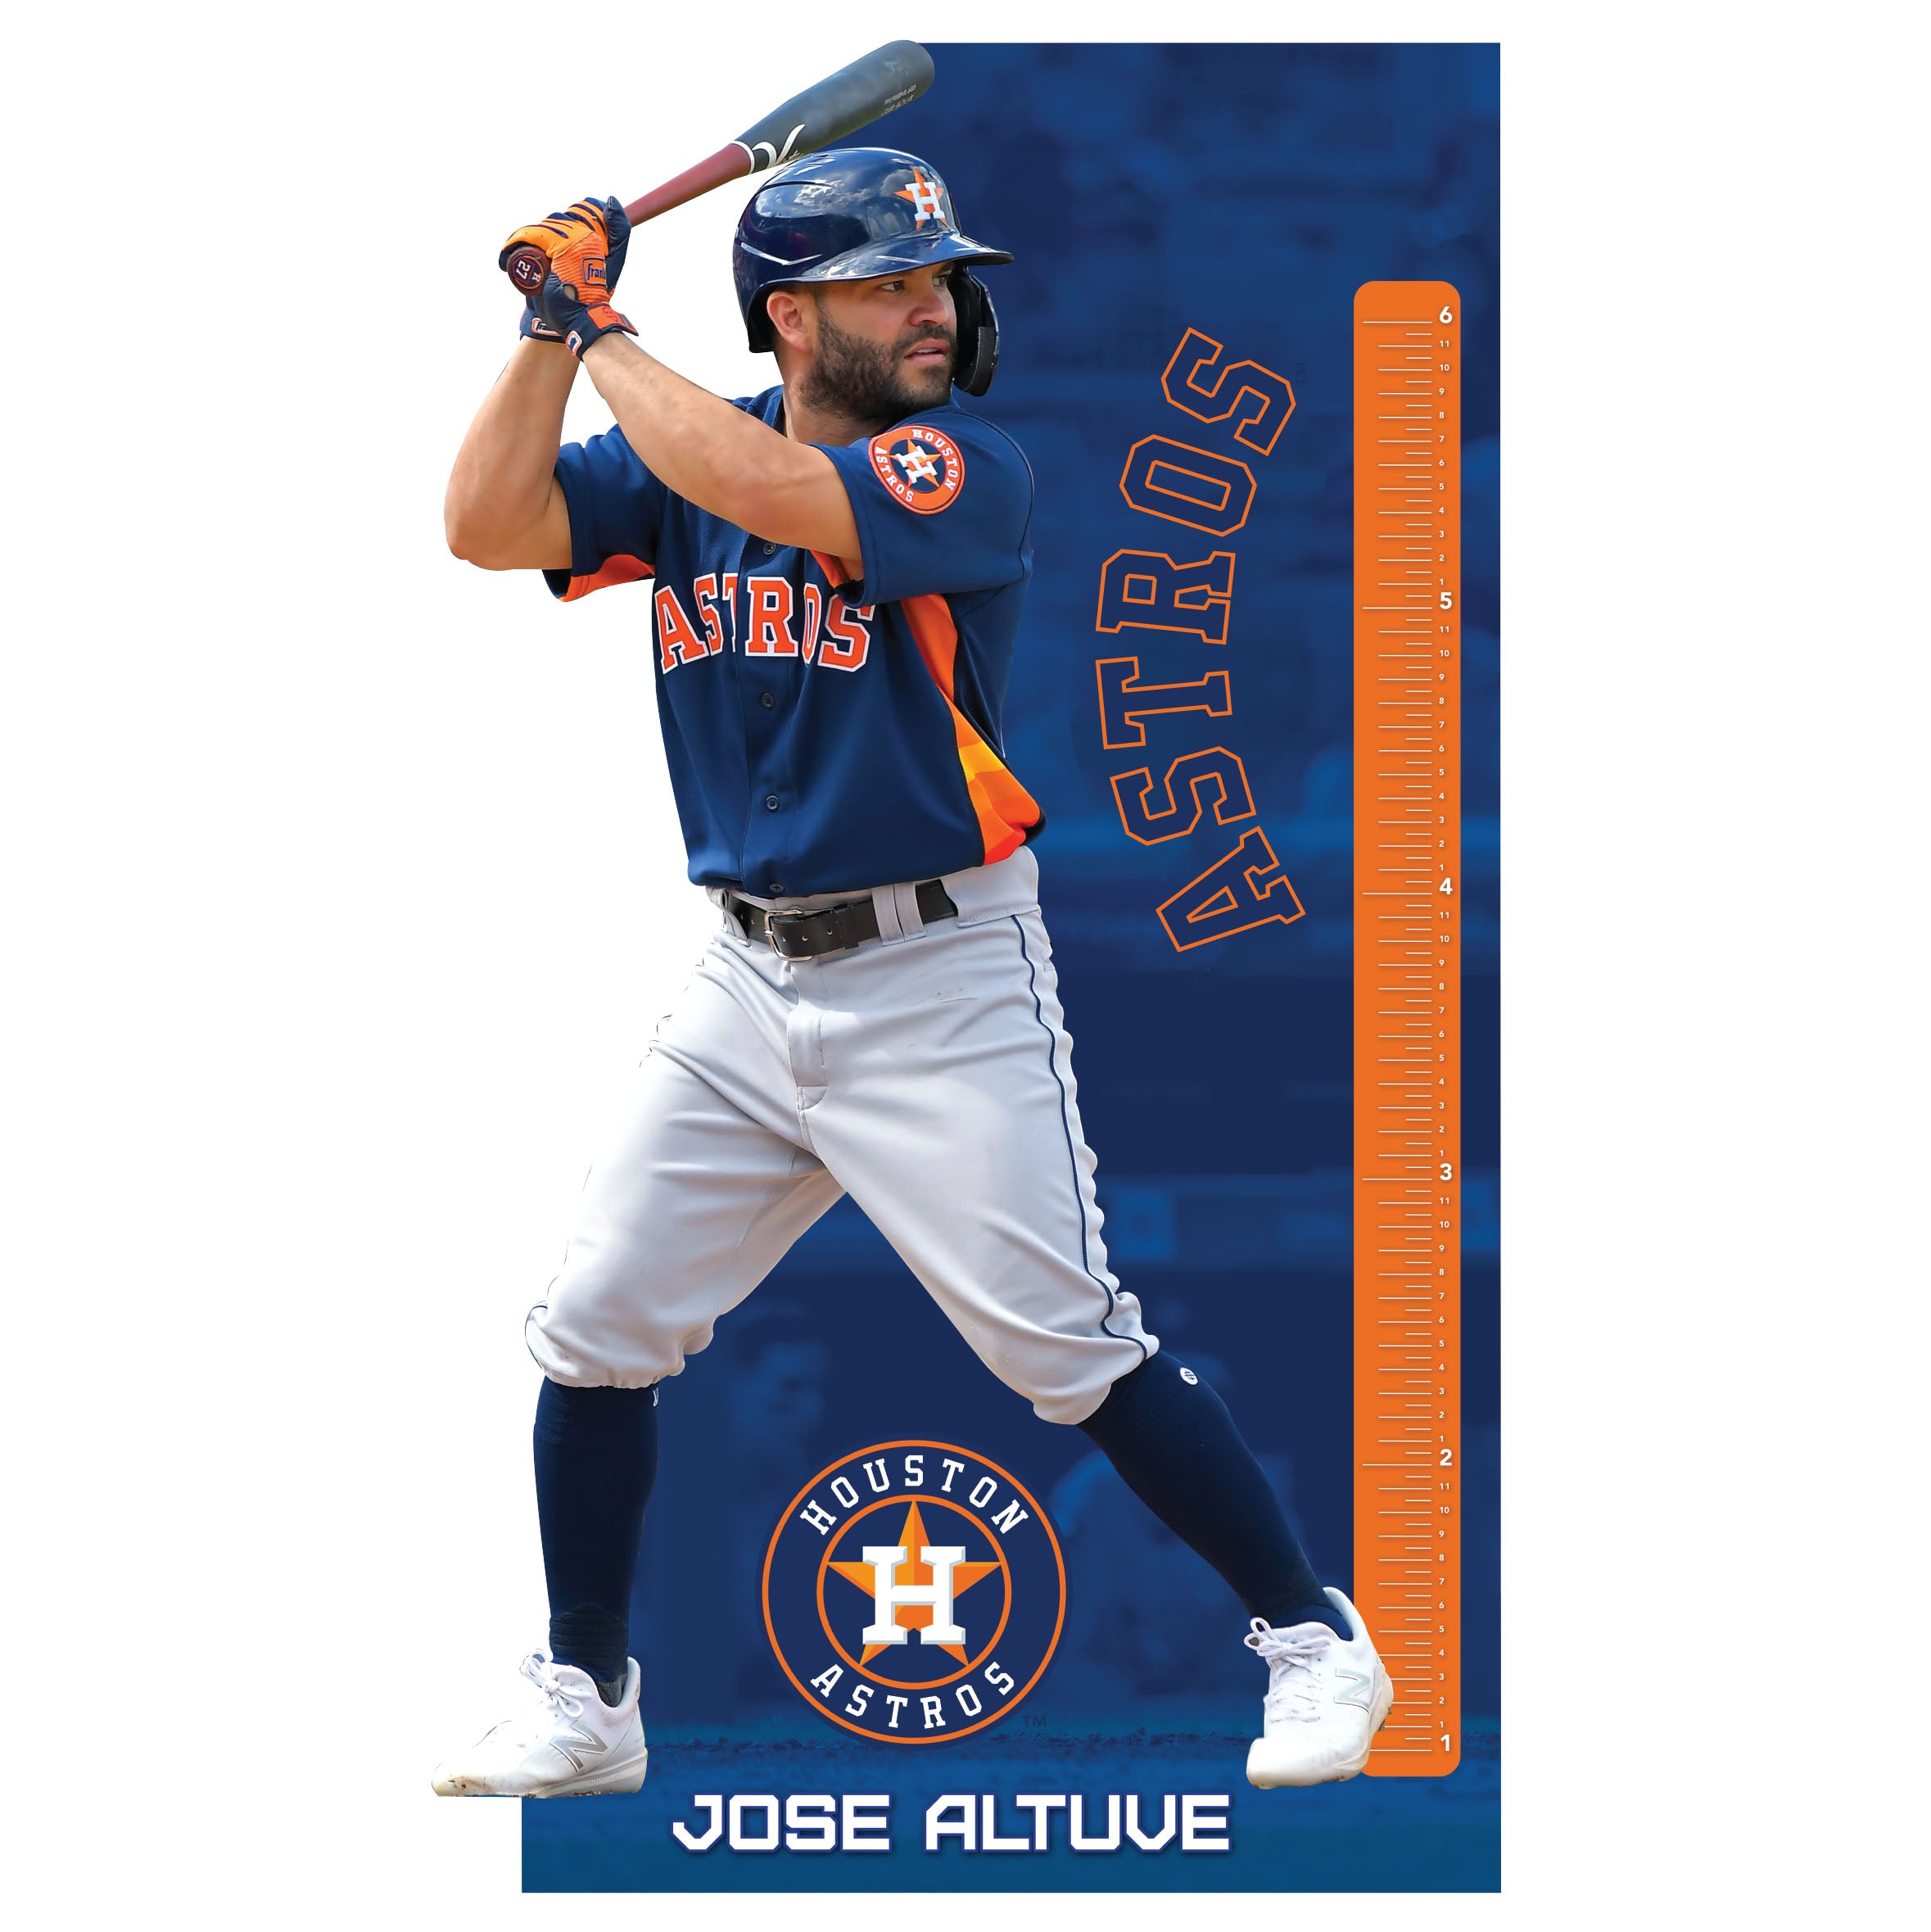 Houston Astros: Jose Altuve 2021 Growth Chart - Officially